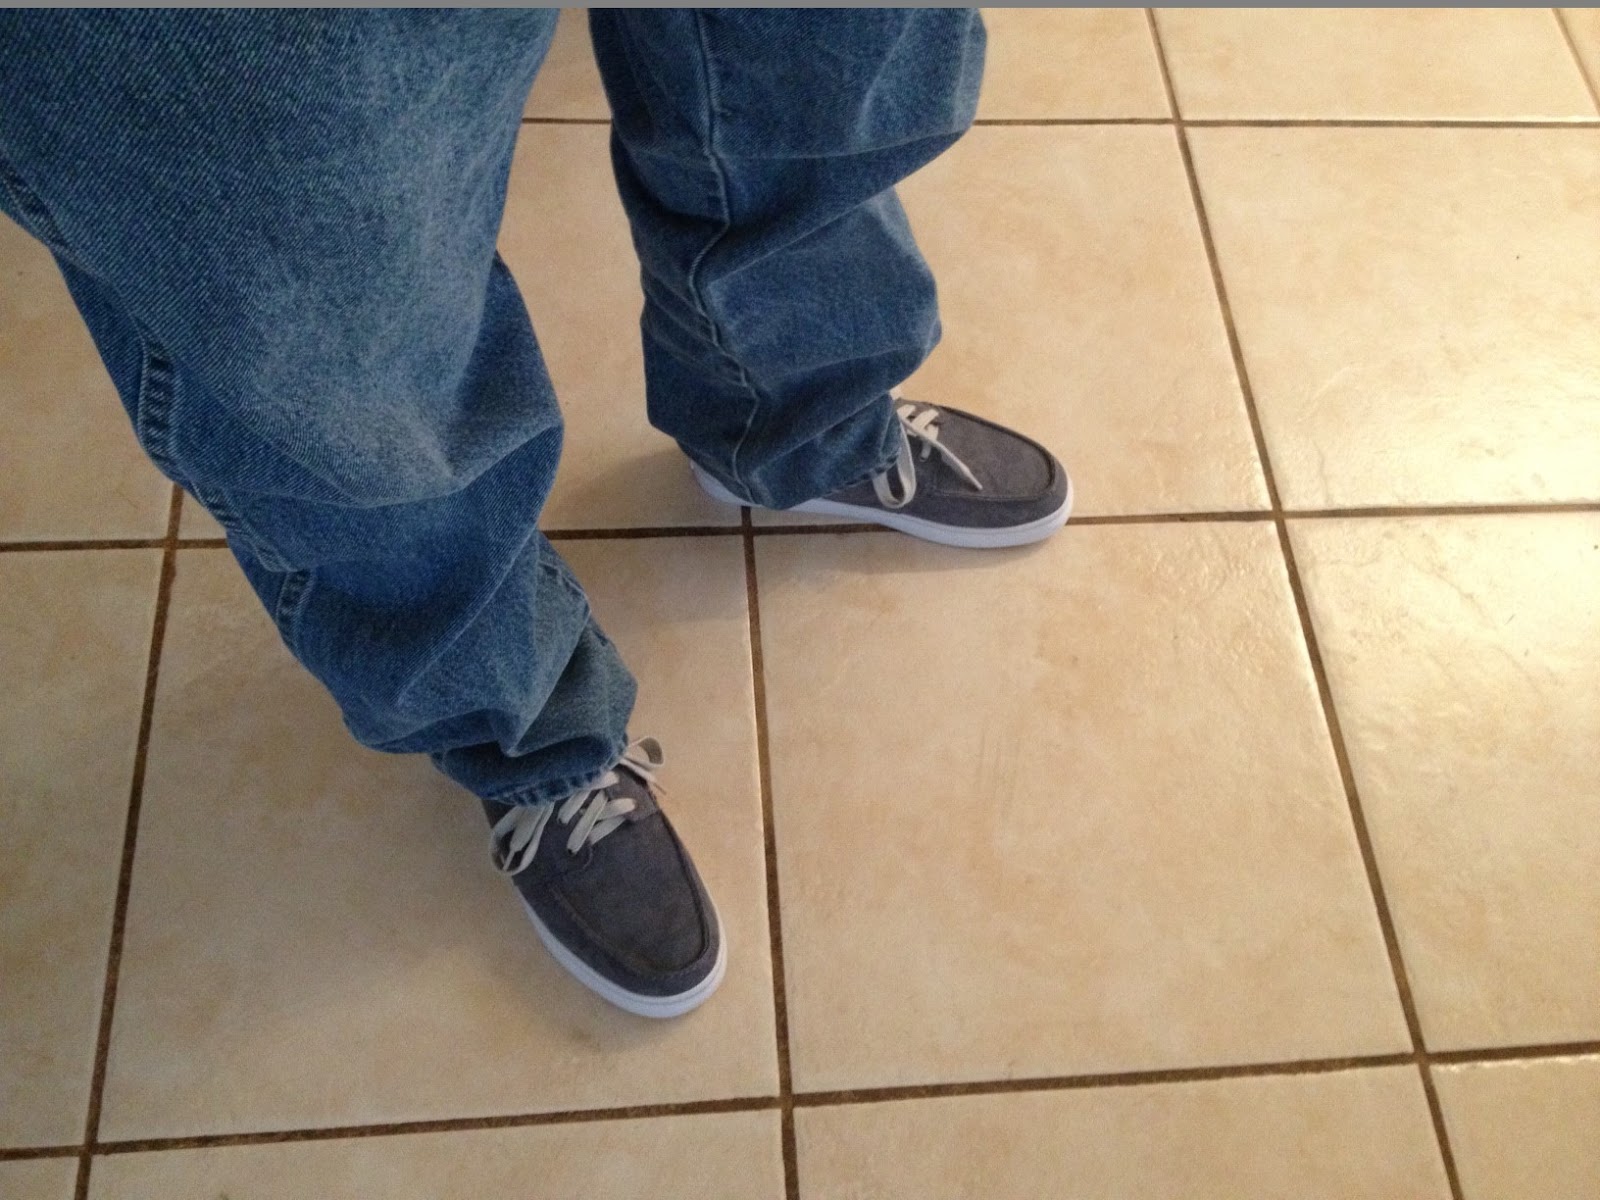 Frugal Shopping and More: Lugz Men's Burkes Review and Giveaway - ends 8/6